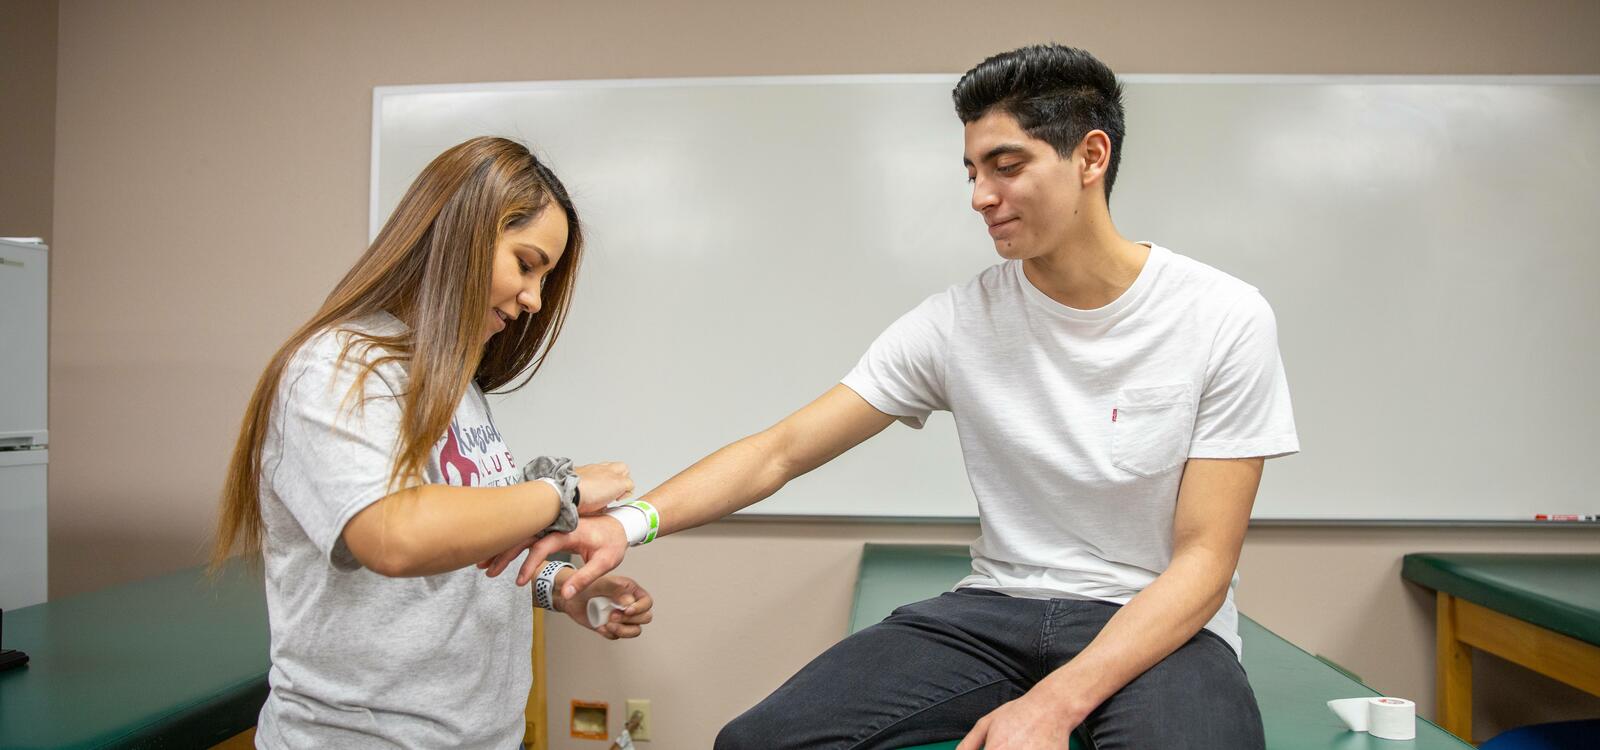 Two students practicing wrapping an injury at the kinesiology building.